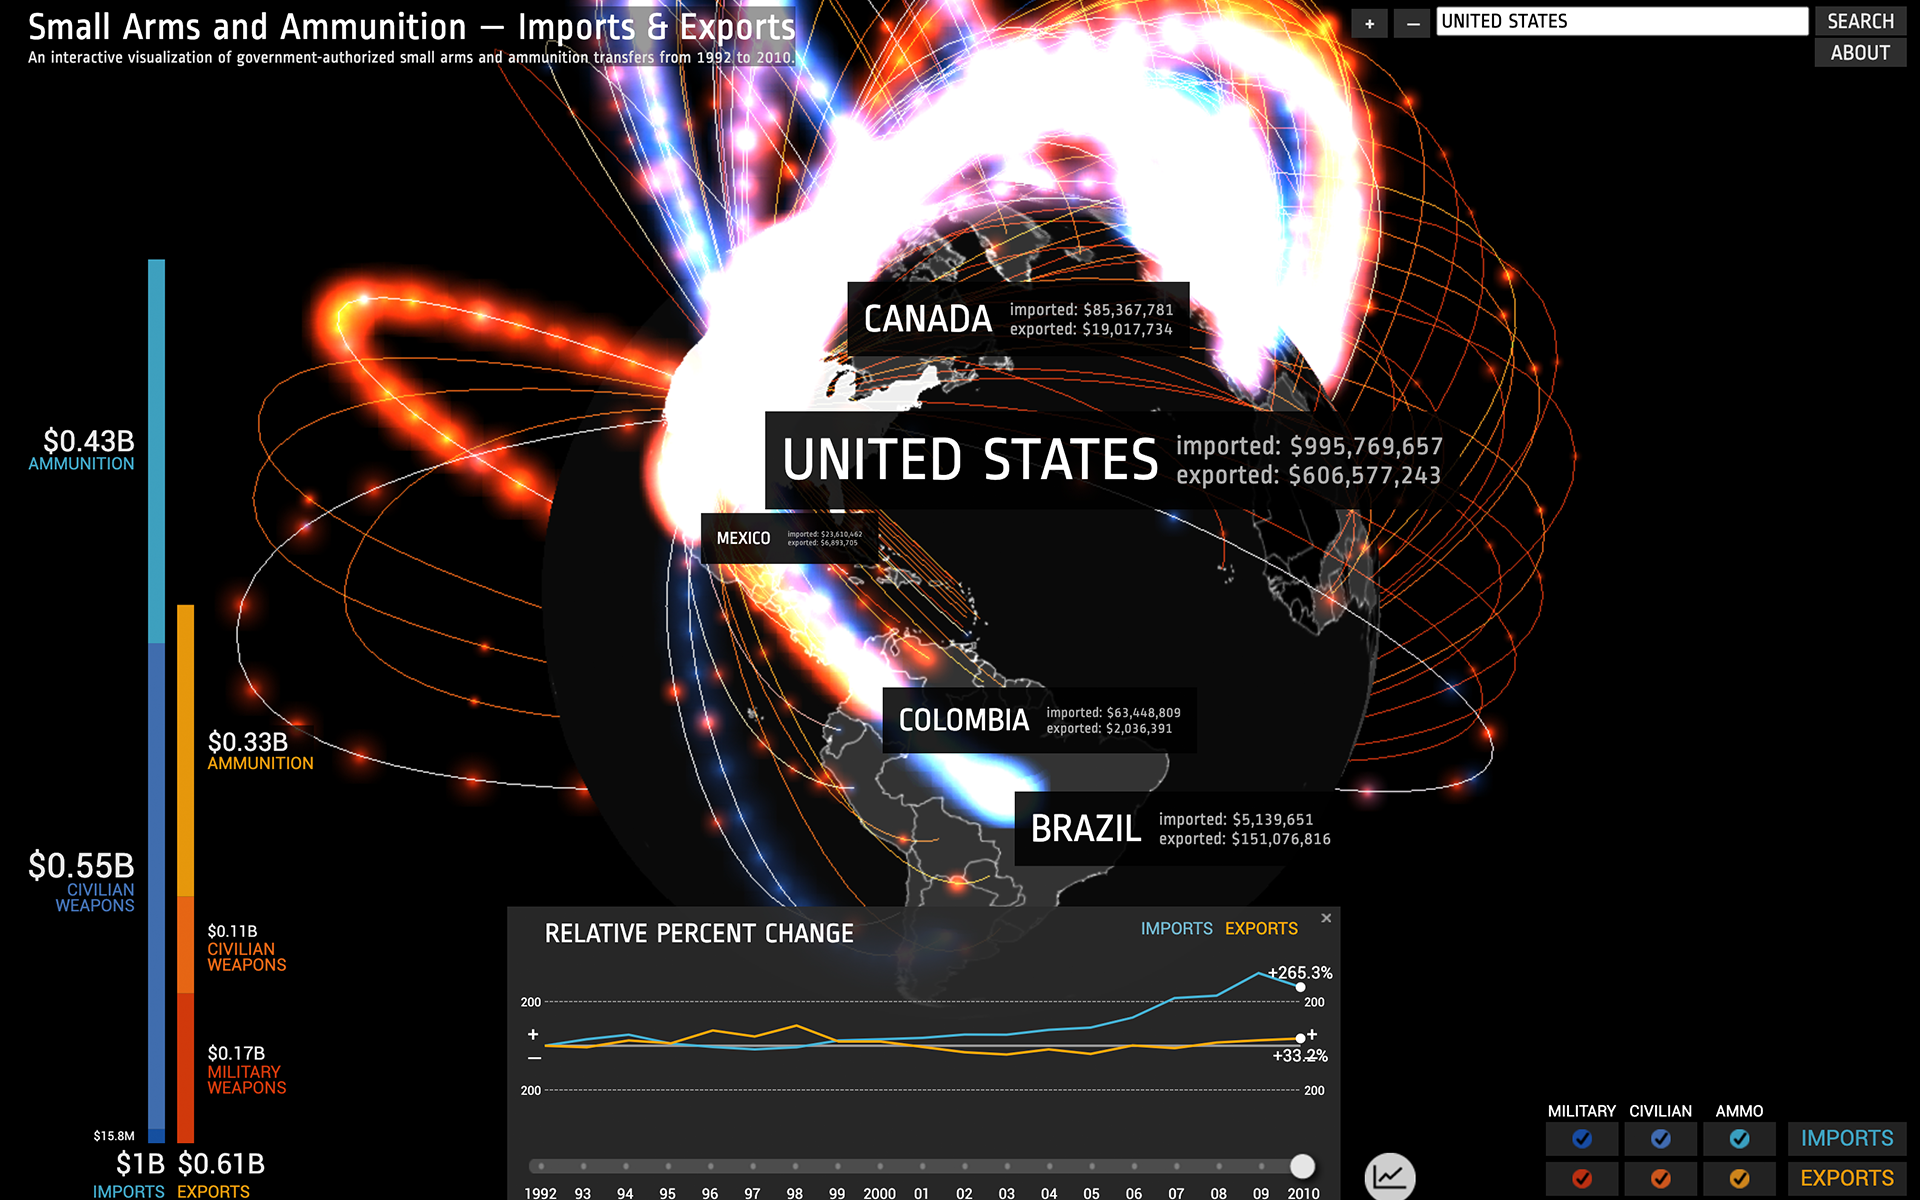 Global Arms Trade Visualization #2